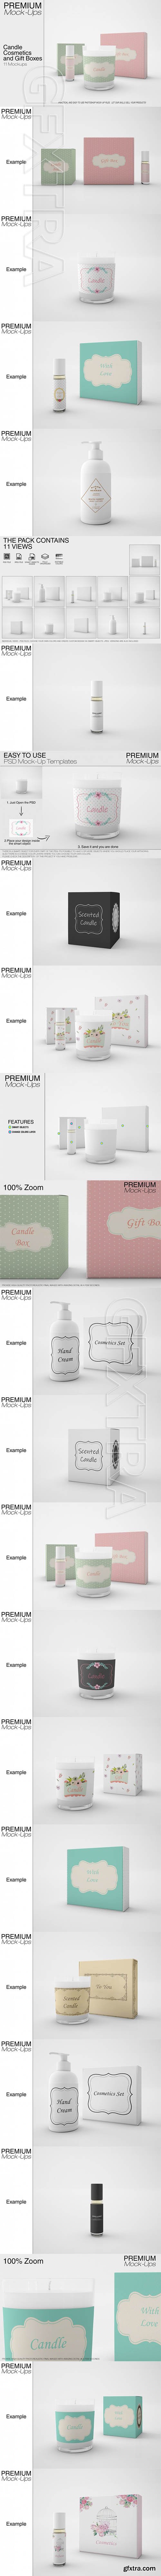 CM - Candle, Cosmetics & Gift Boxes Set 2611939